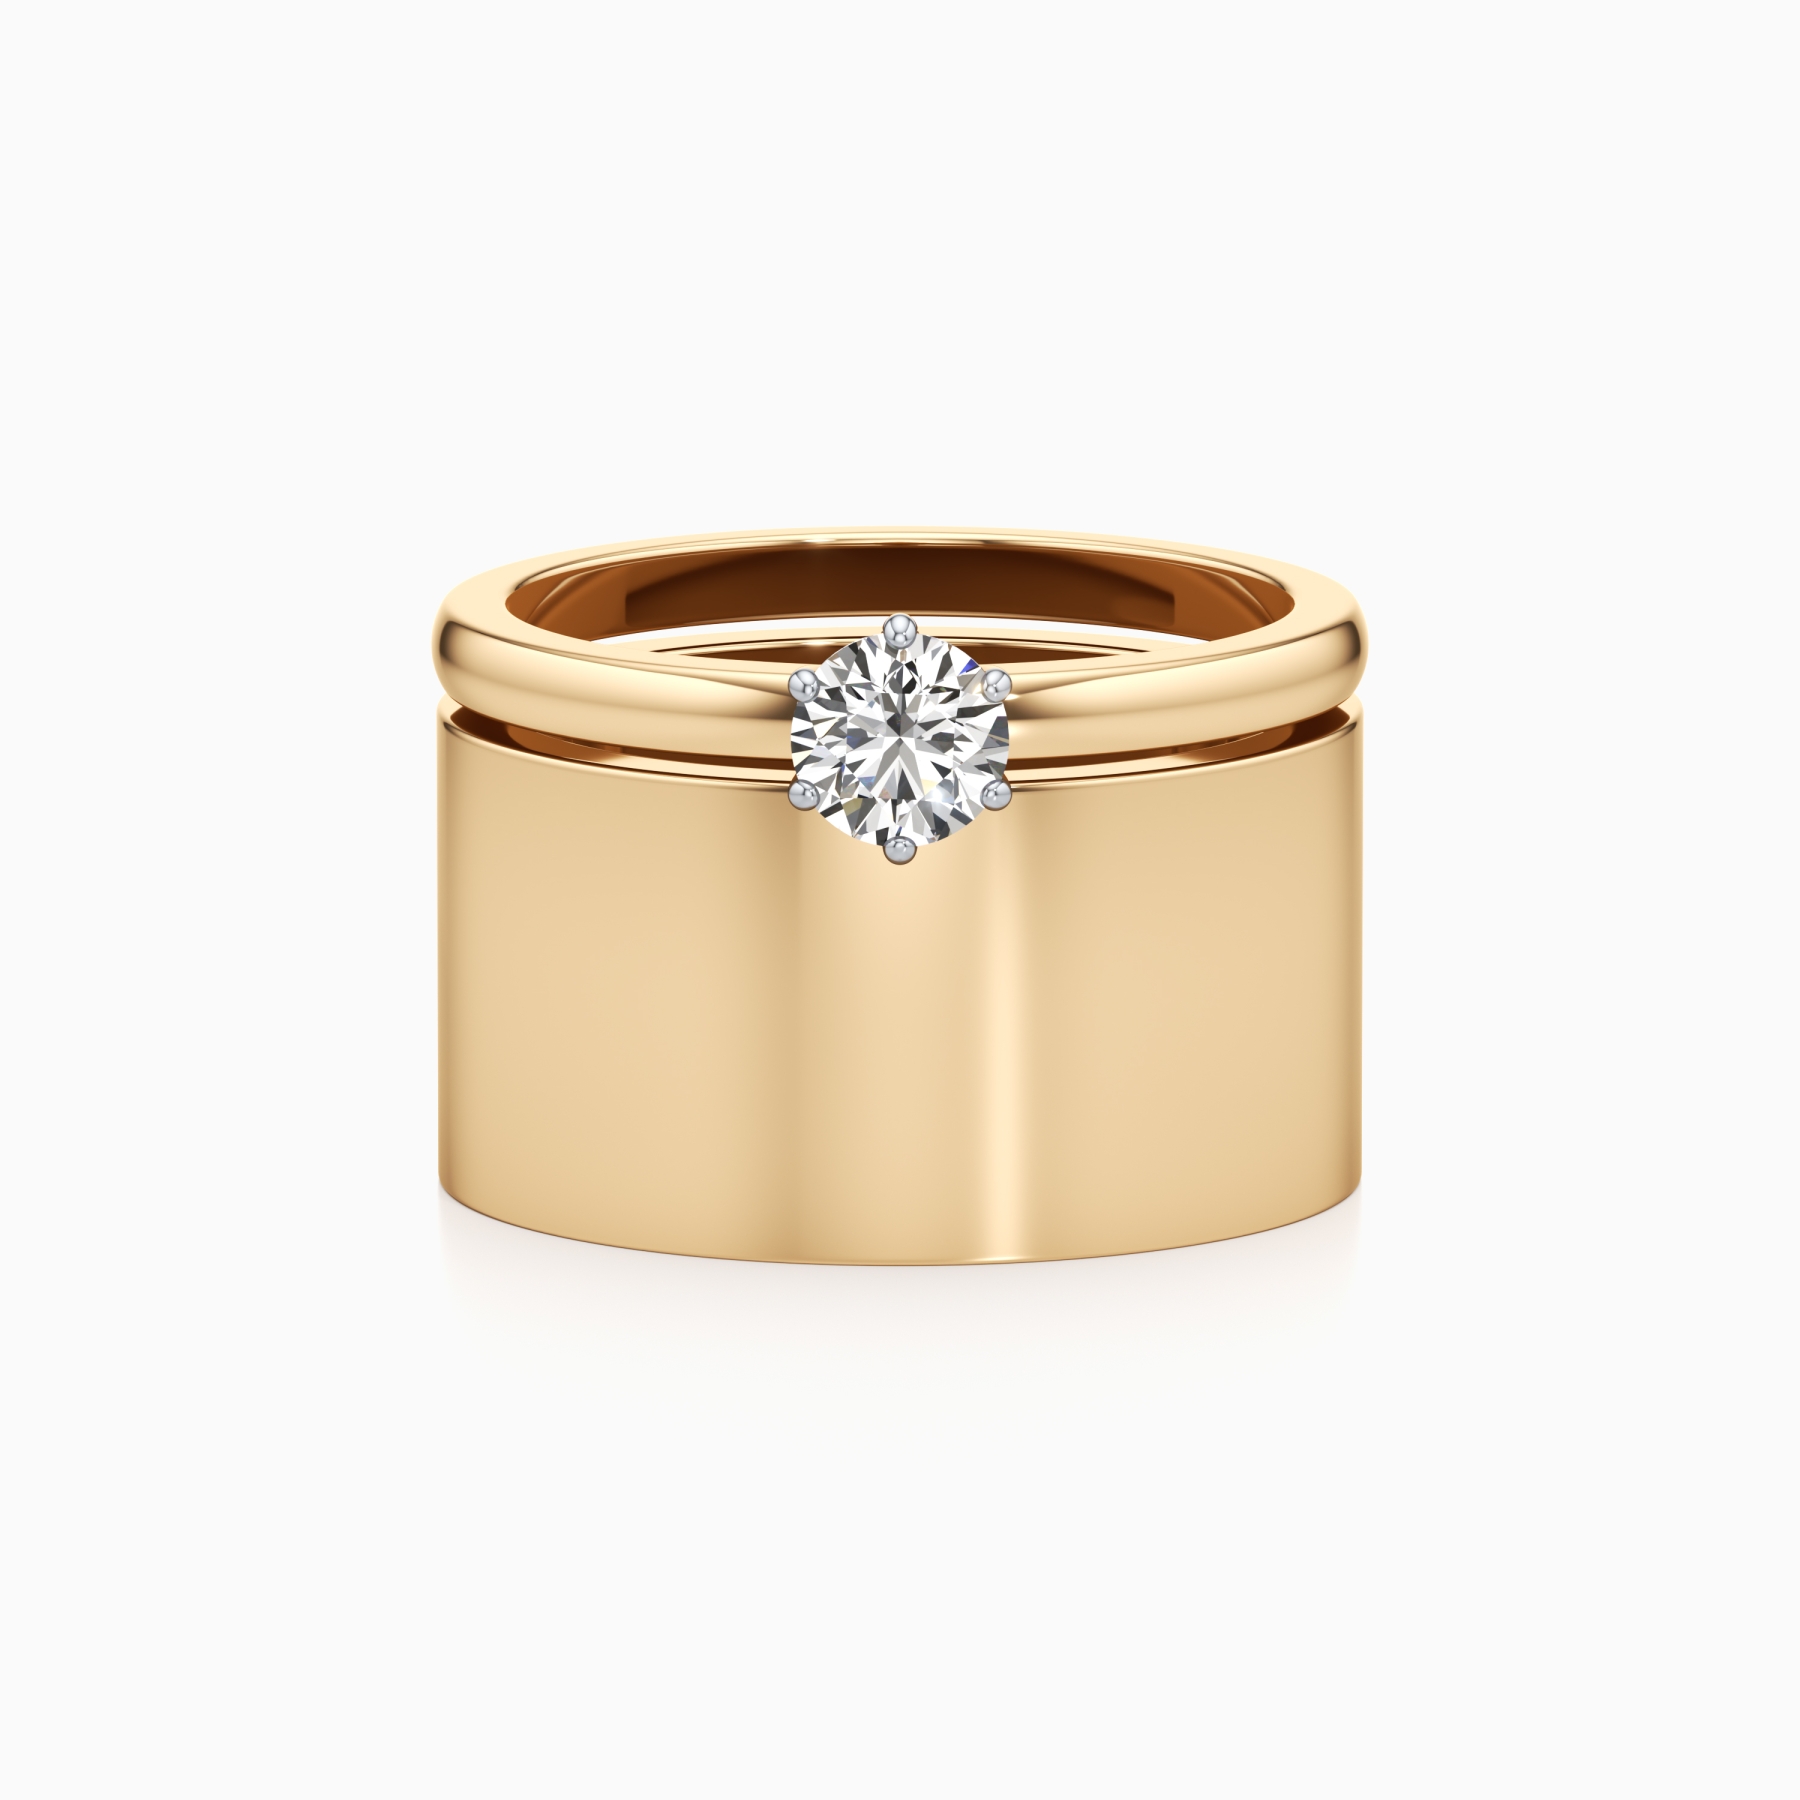 Smooth-Cut Wide Diamond Ring in Yellow 14k Gold